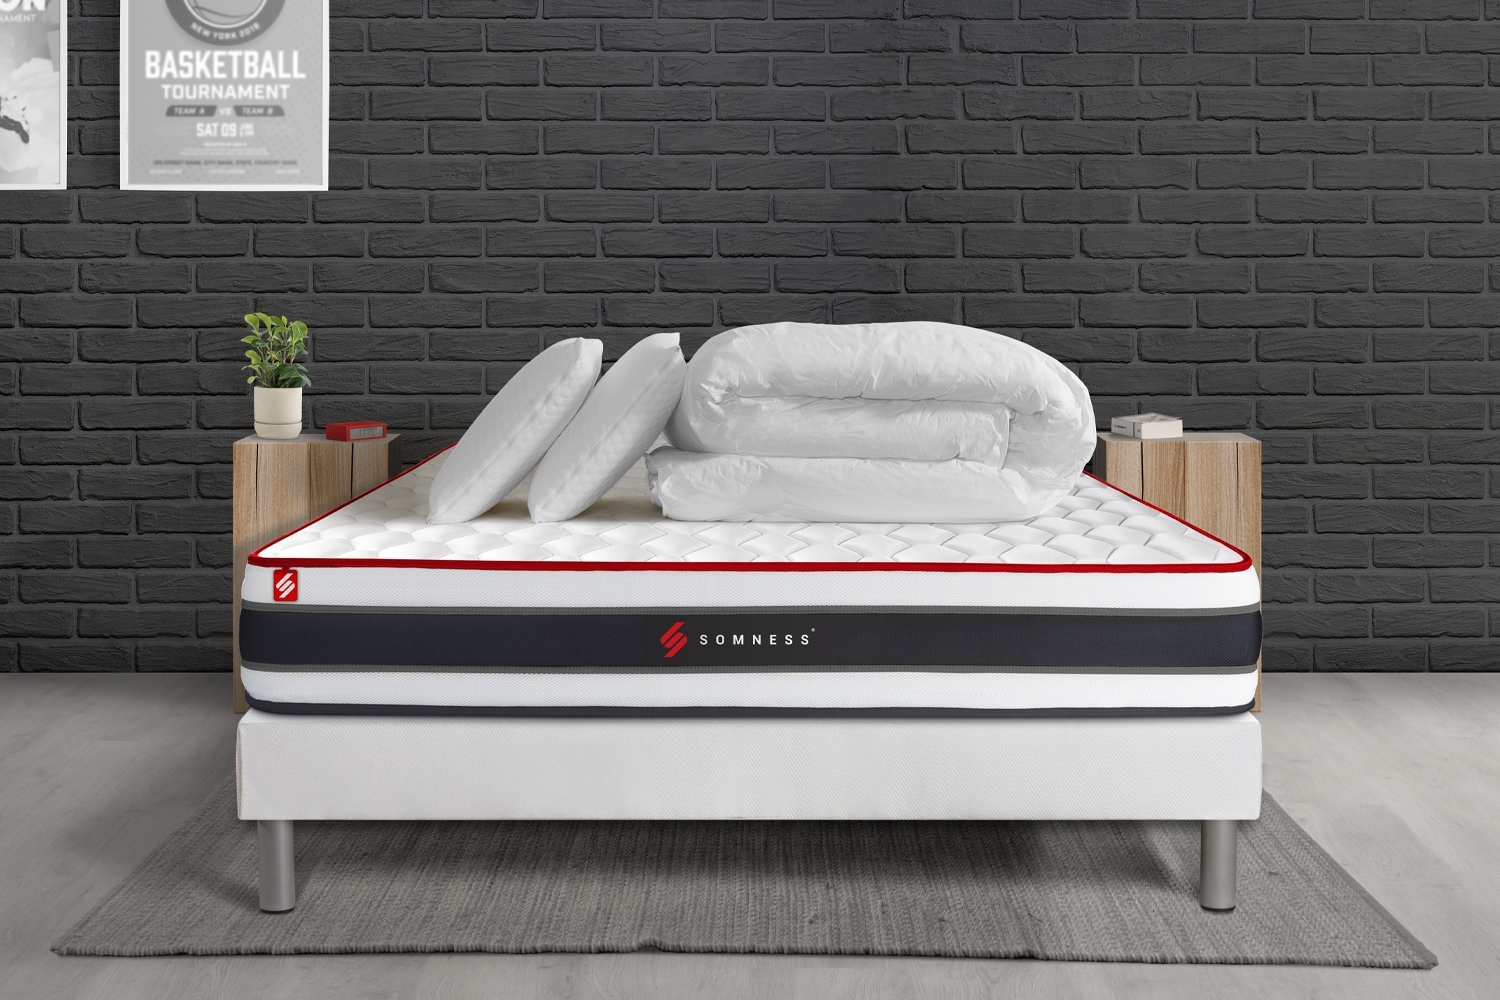 Pack matelas ENERGY 140x200 + sommier blanc + Couette + 2 oreillers